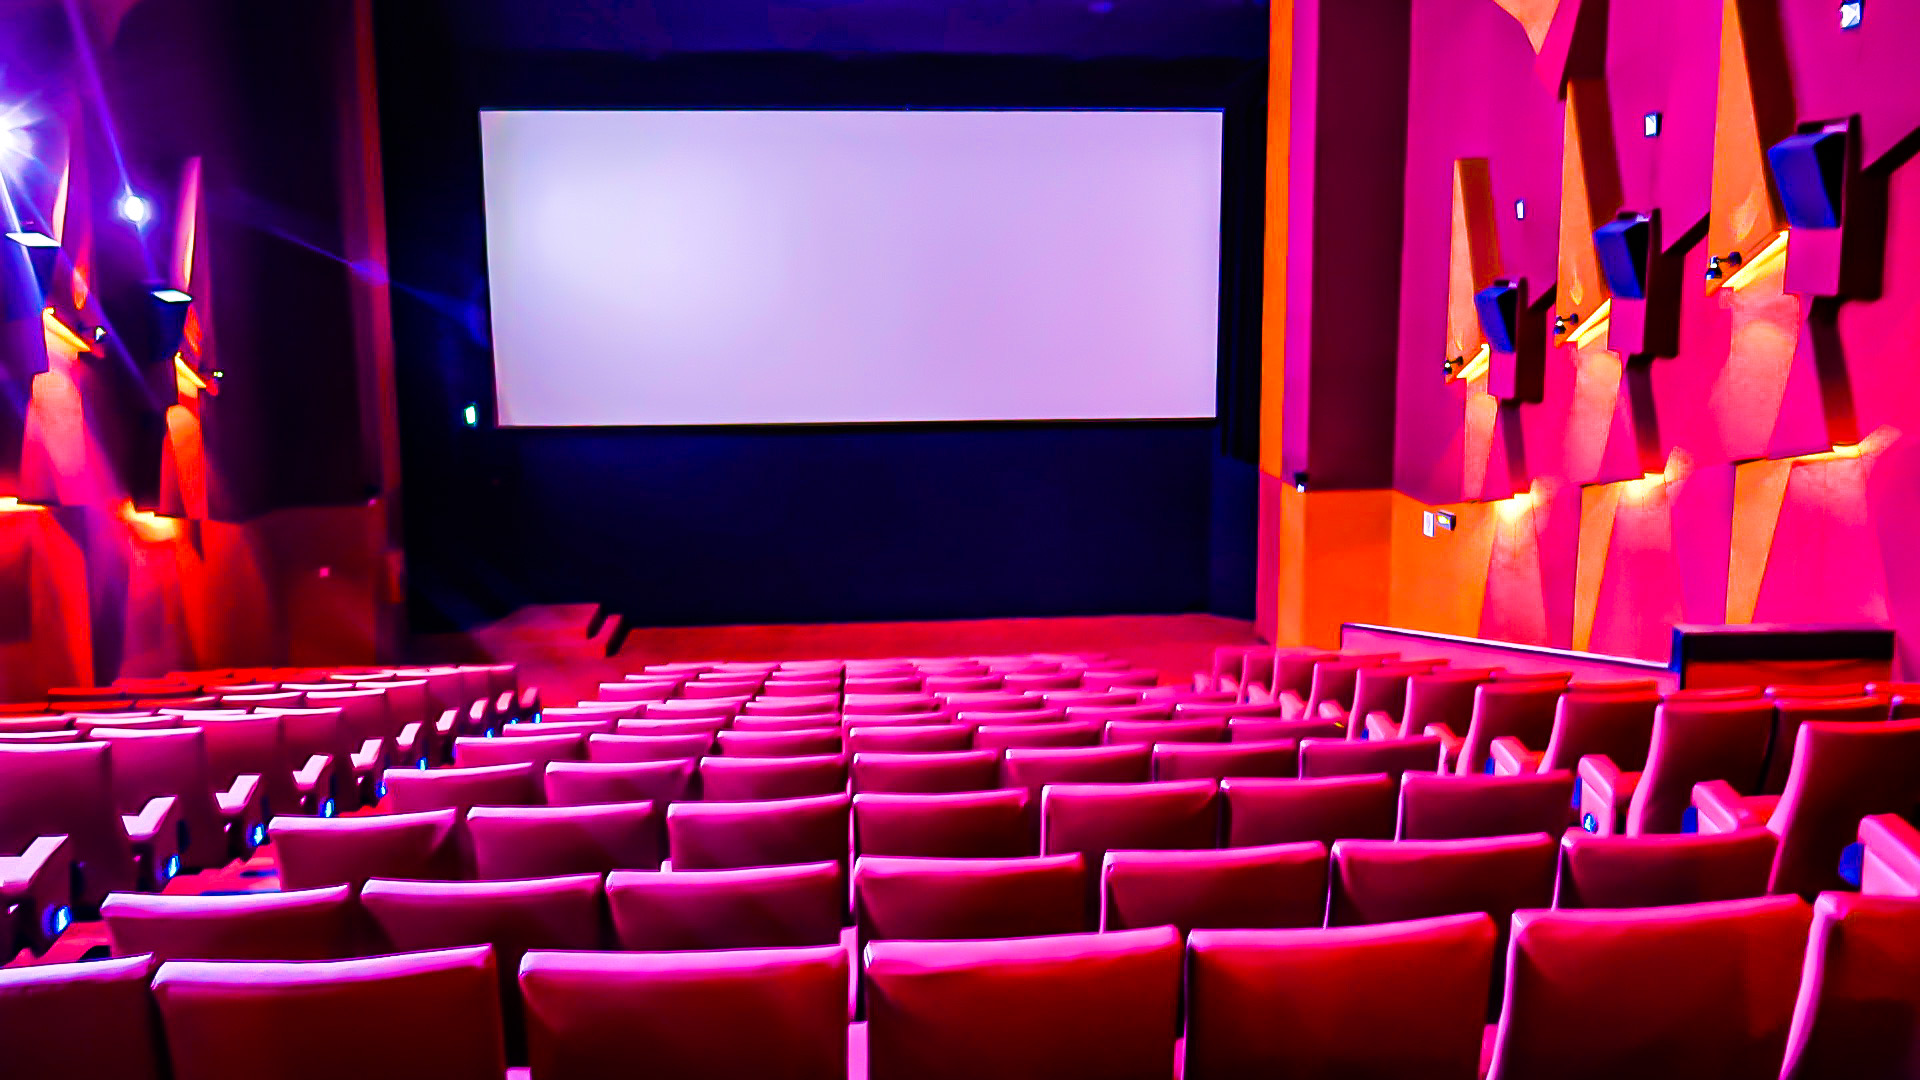 , Golden Village X The Projector at Cineleisure is the new hangout for all moviegoers